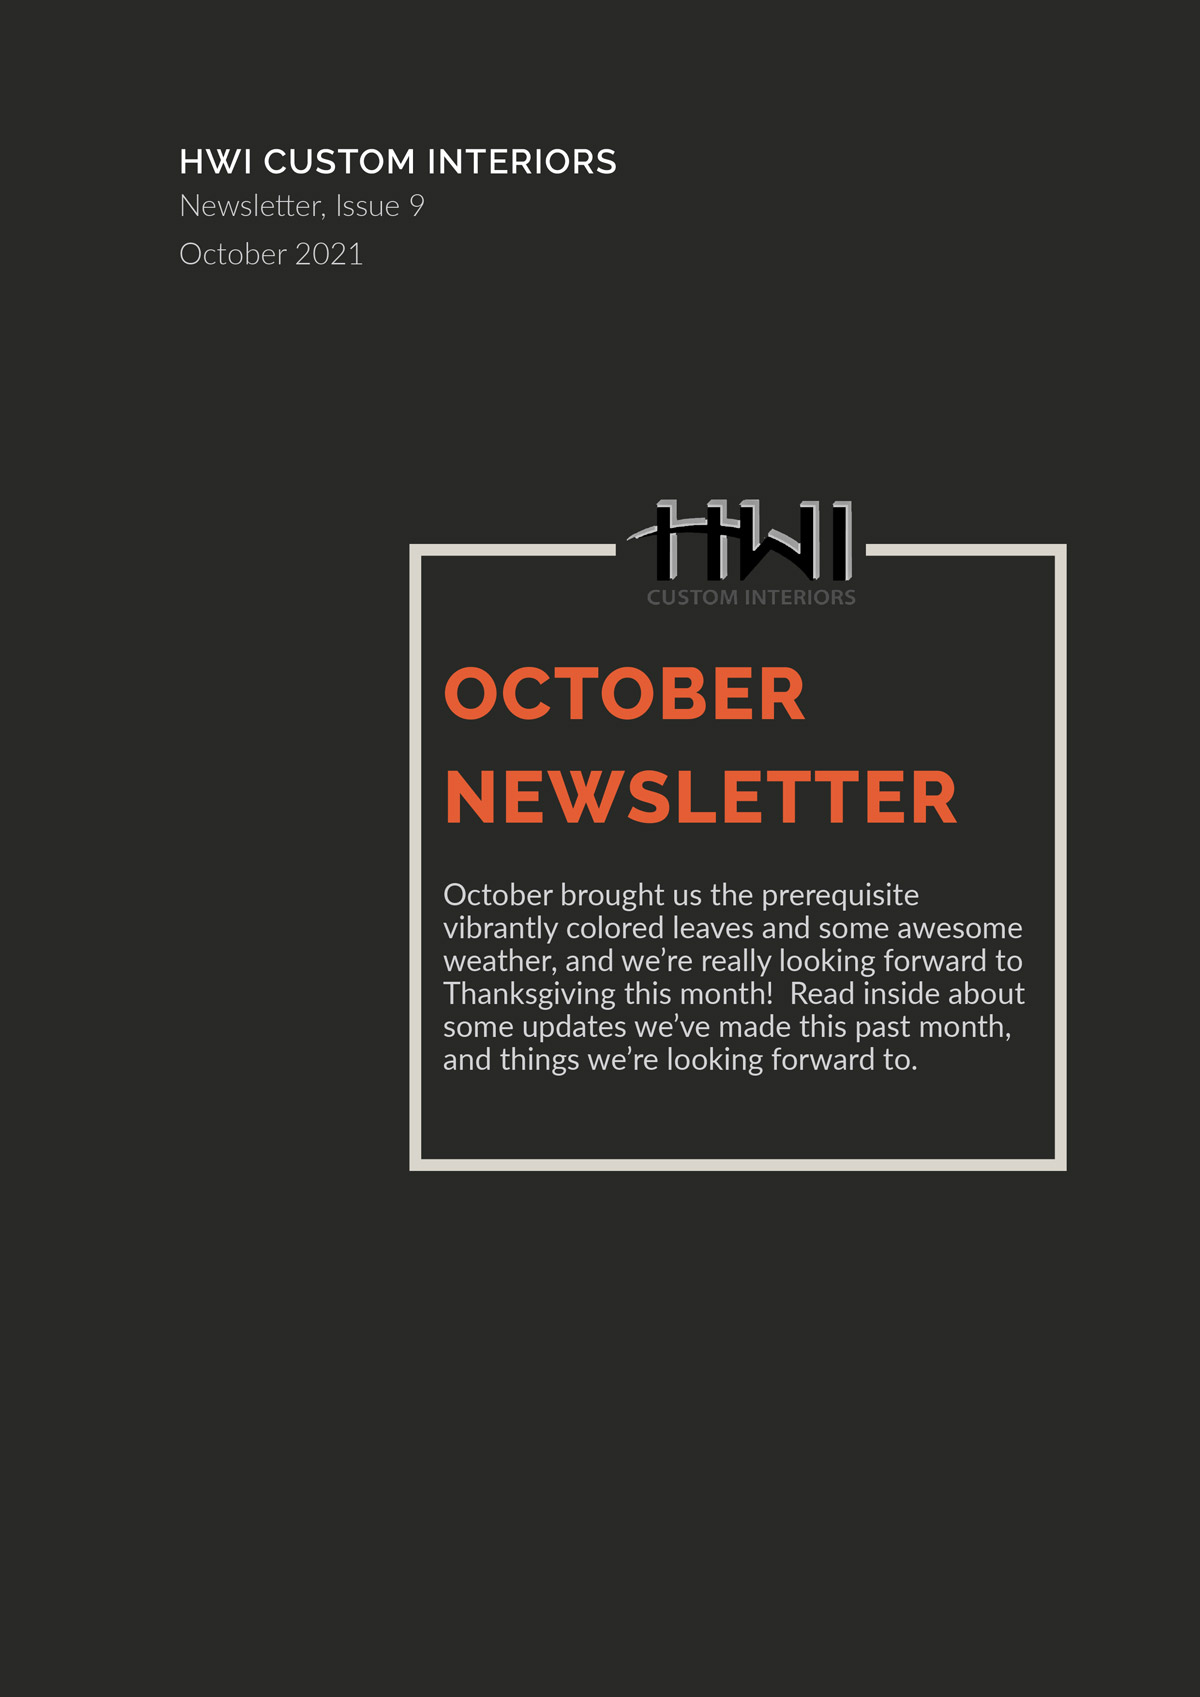 HWI Custom Interiors October Newsletter. New Edgebender and Conveyer, new discoveries in timber construction, and HWI updates!